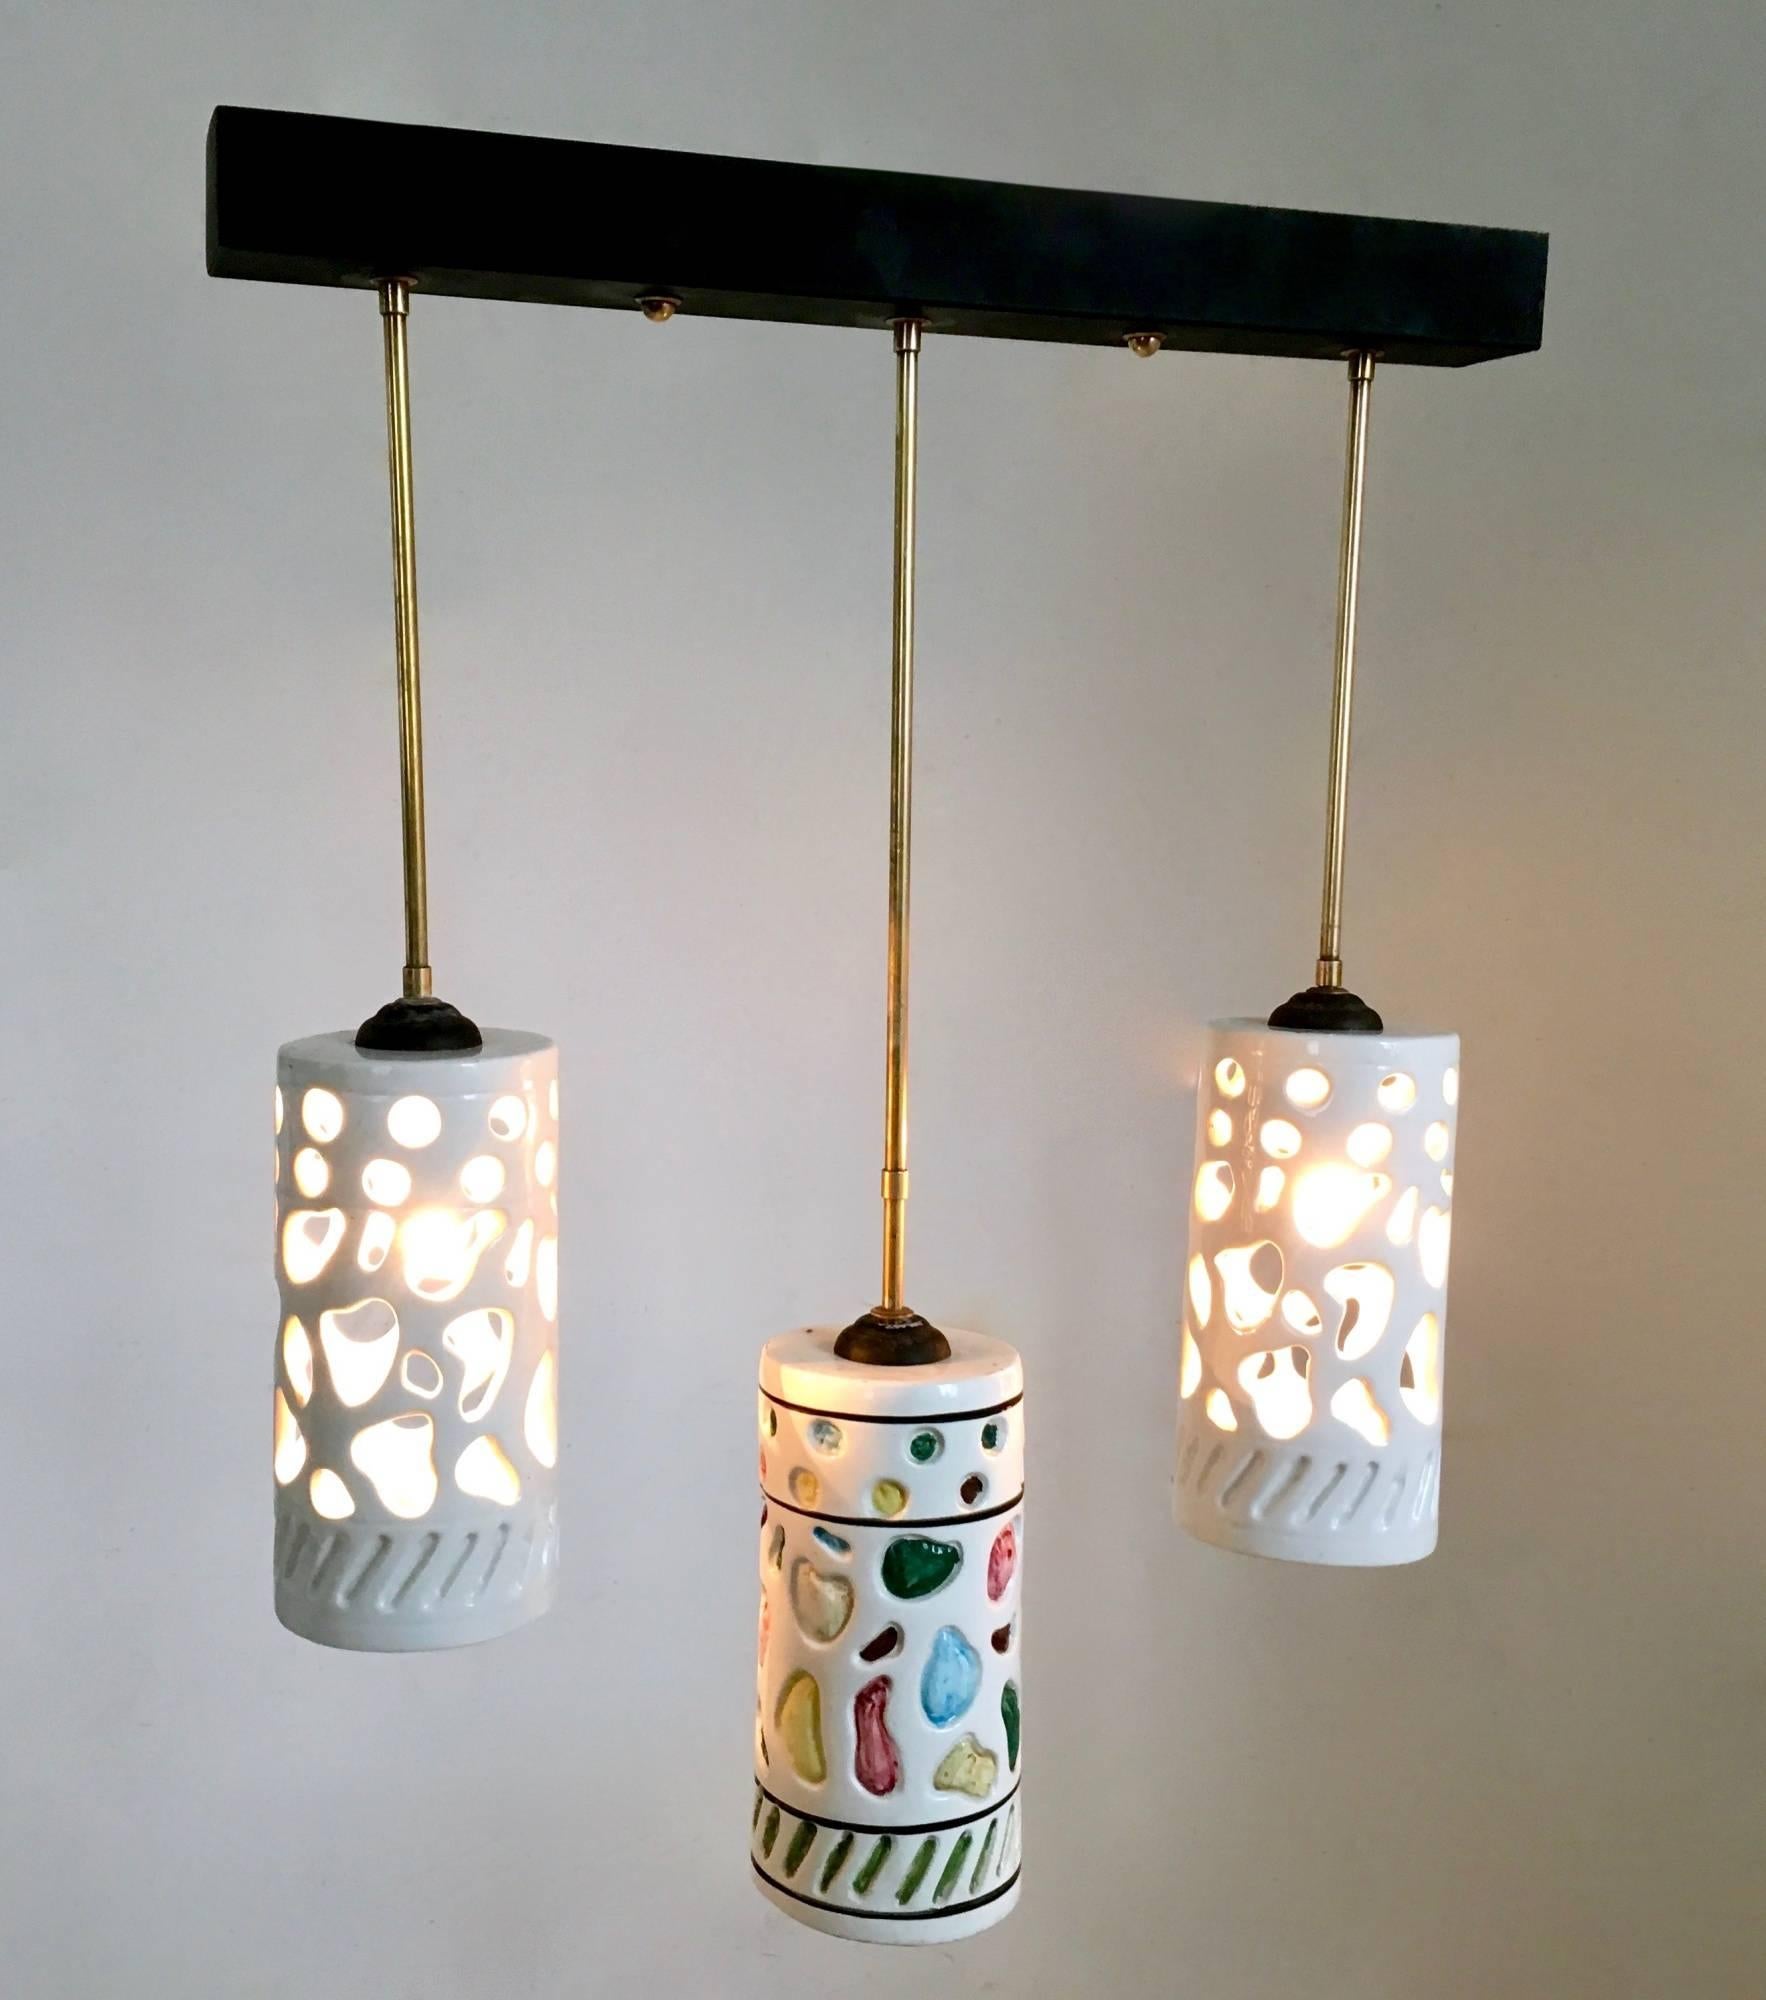 Made in Italy, 1960s. 
This chandelier features three white cylindrical ceramic lampshades with colored details and a varnished metal and brass frame.
It is a vintage piece, therefore it might show slight traces of use, but it can be considered as